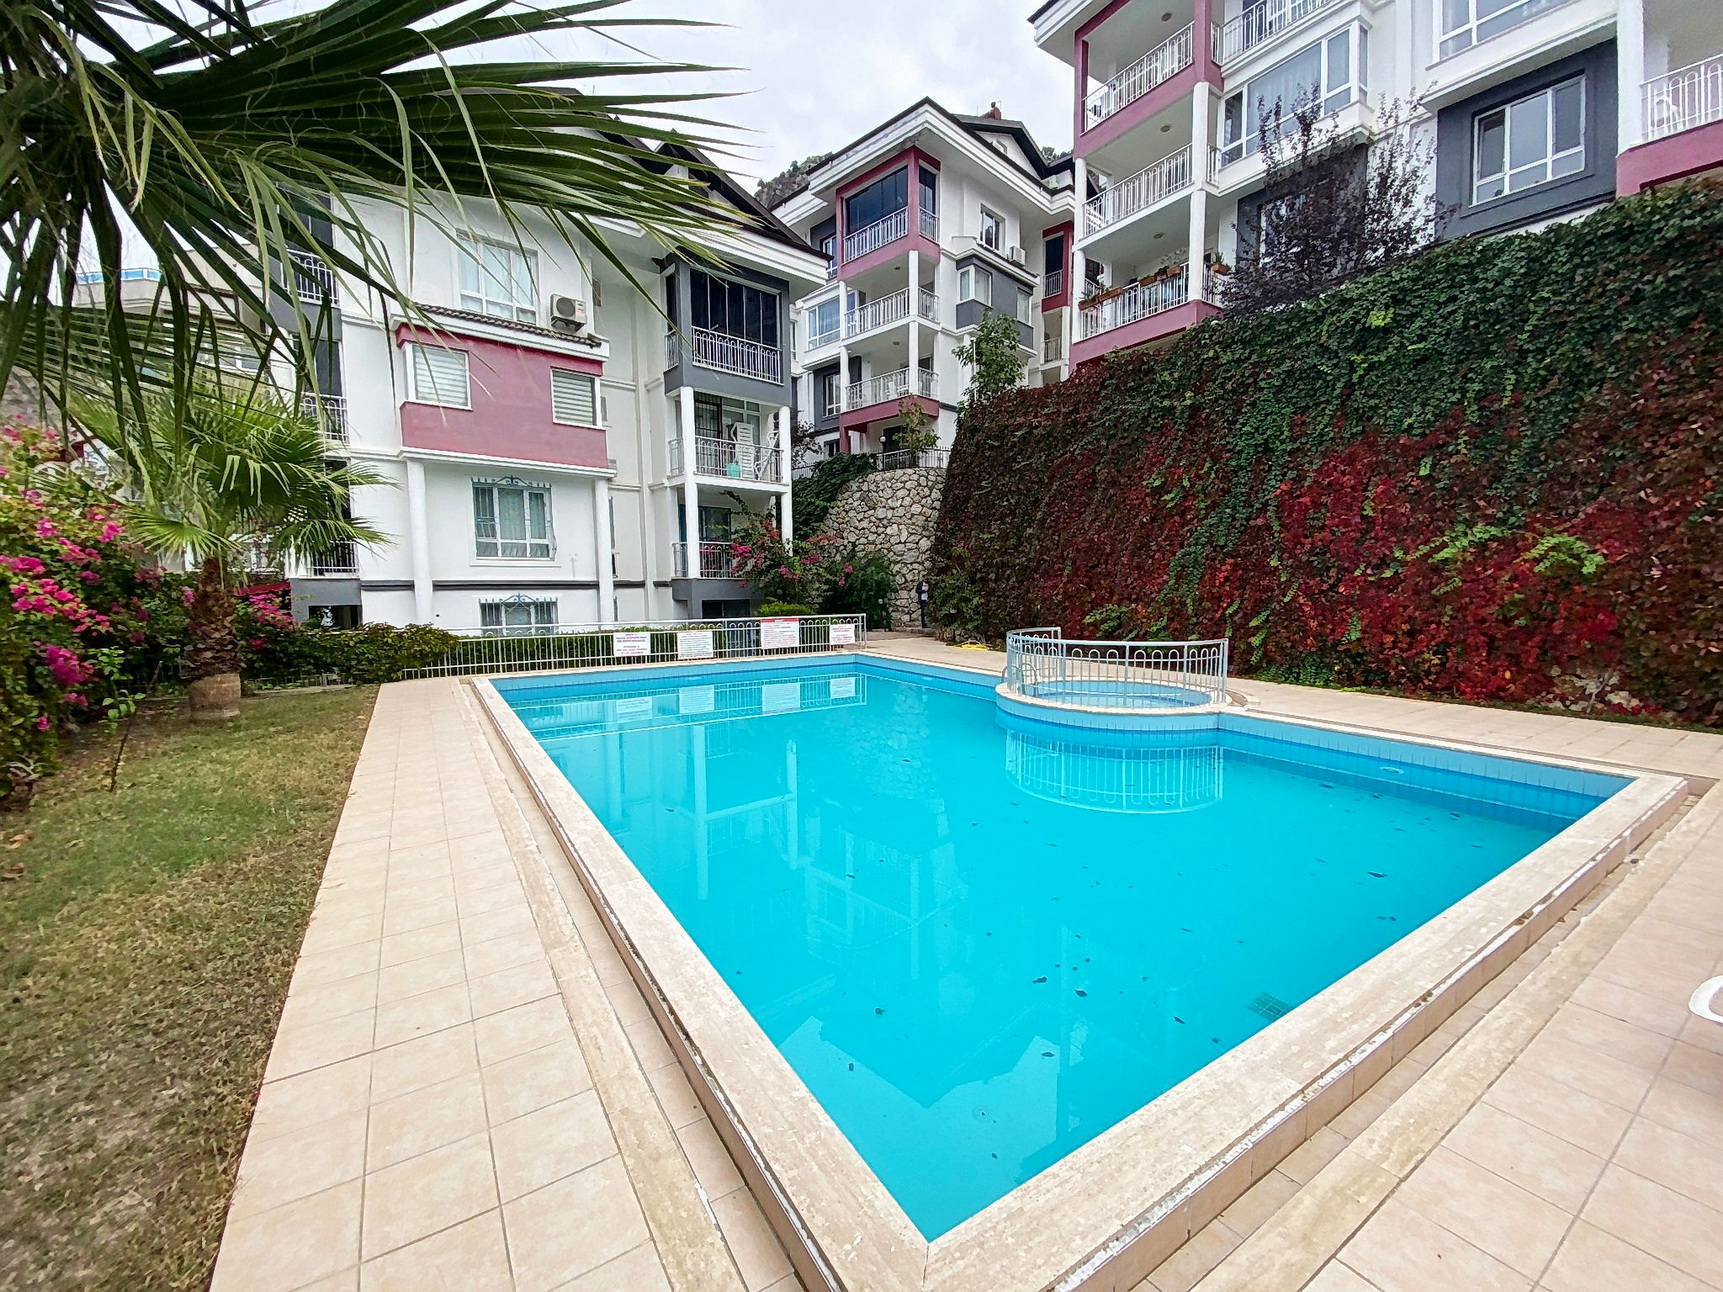 Seaview 4 Bedroom Duplex Apartment in Fethiye Town